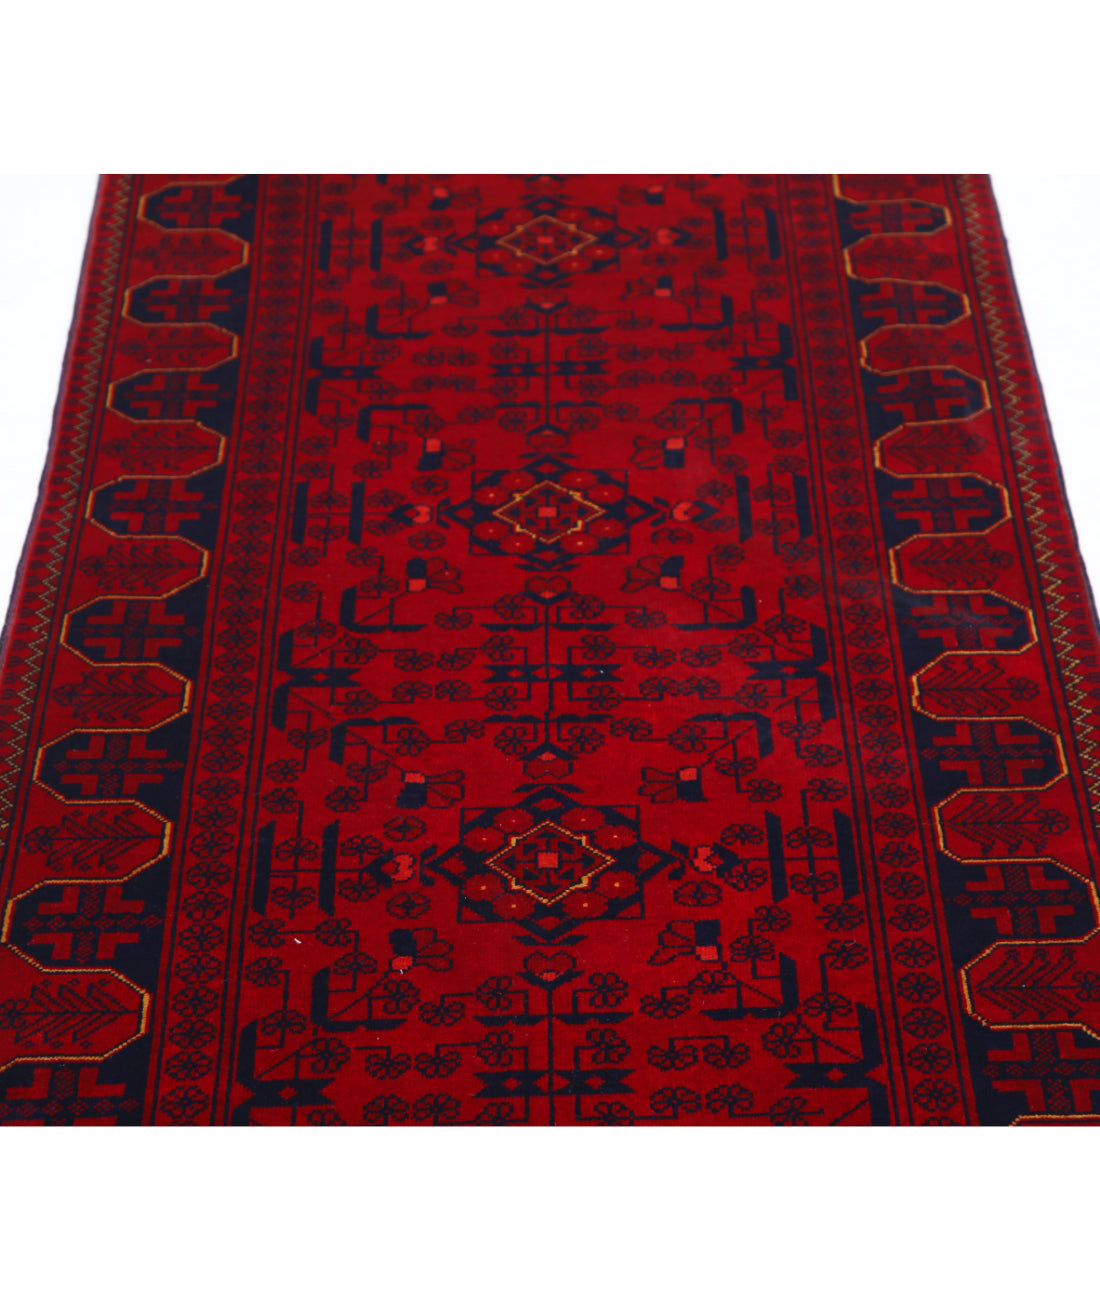 Afghan 2'6'' X 6'3'' Hand-Knotted Wool Rug 2'6'' x 6'3'' (75 X 188) / Red / Red